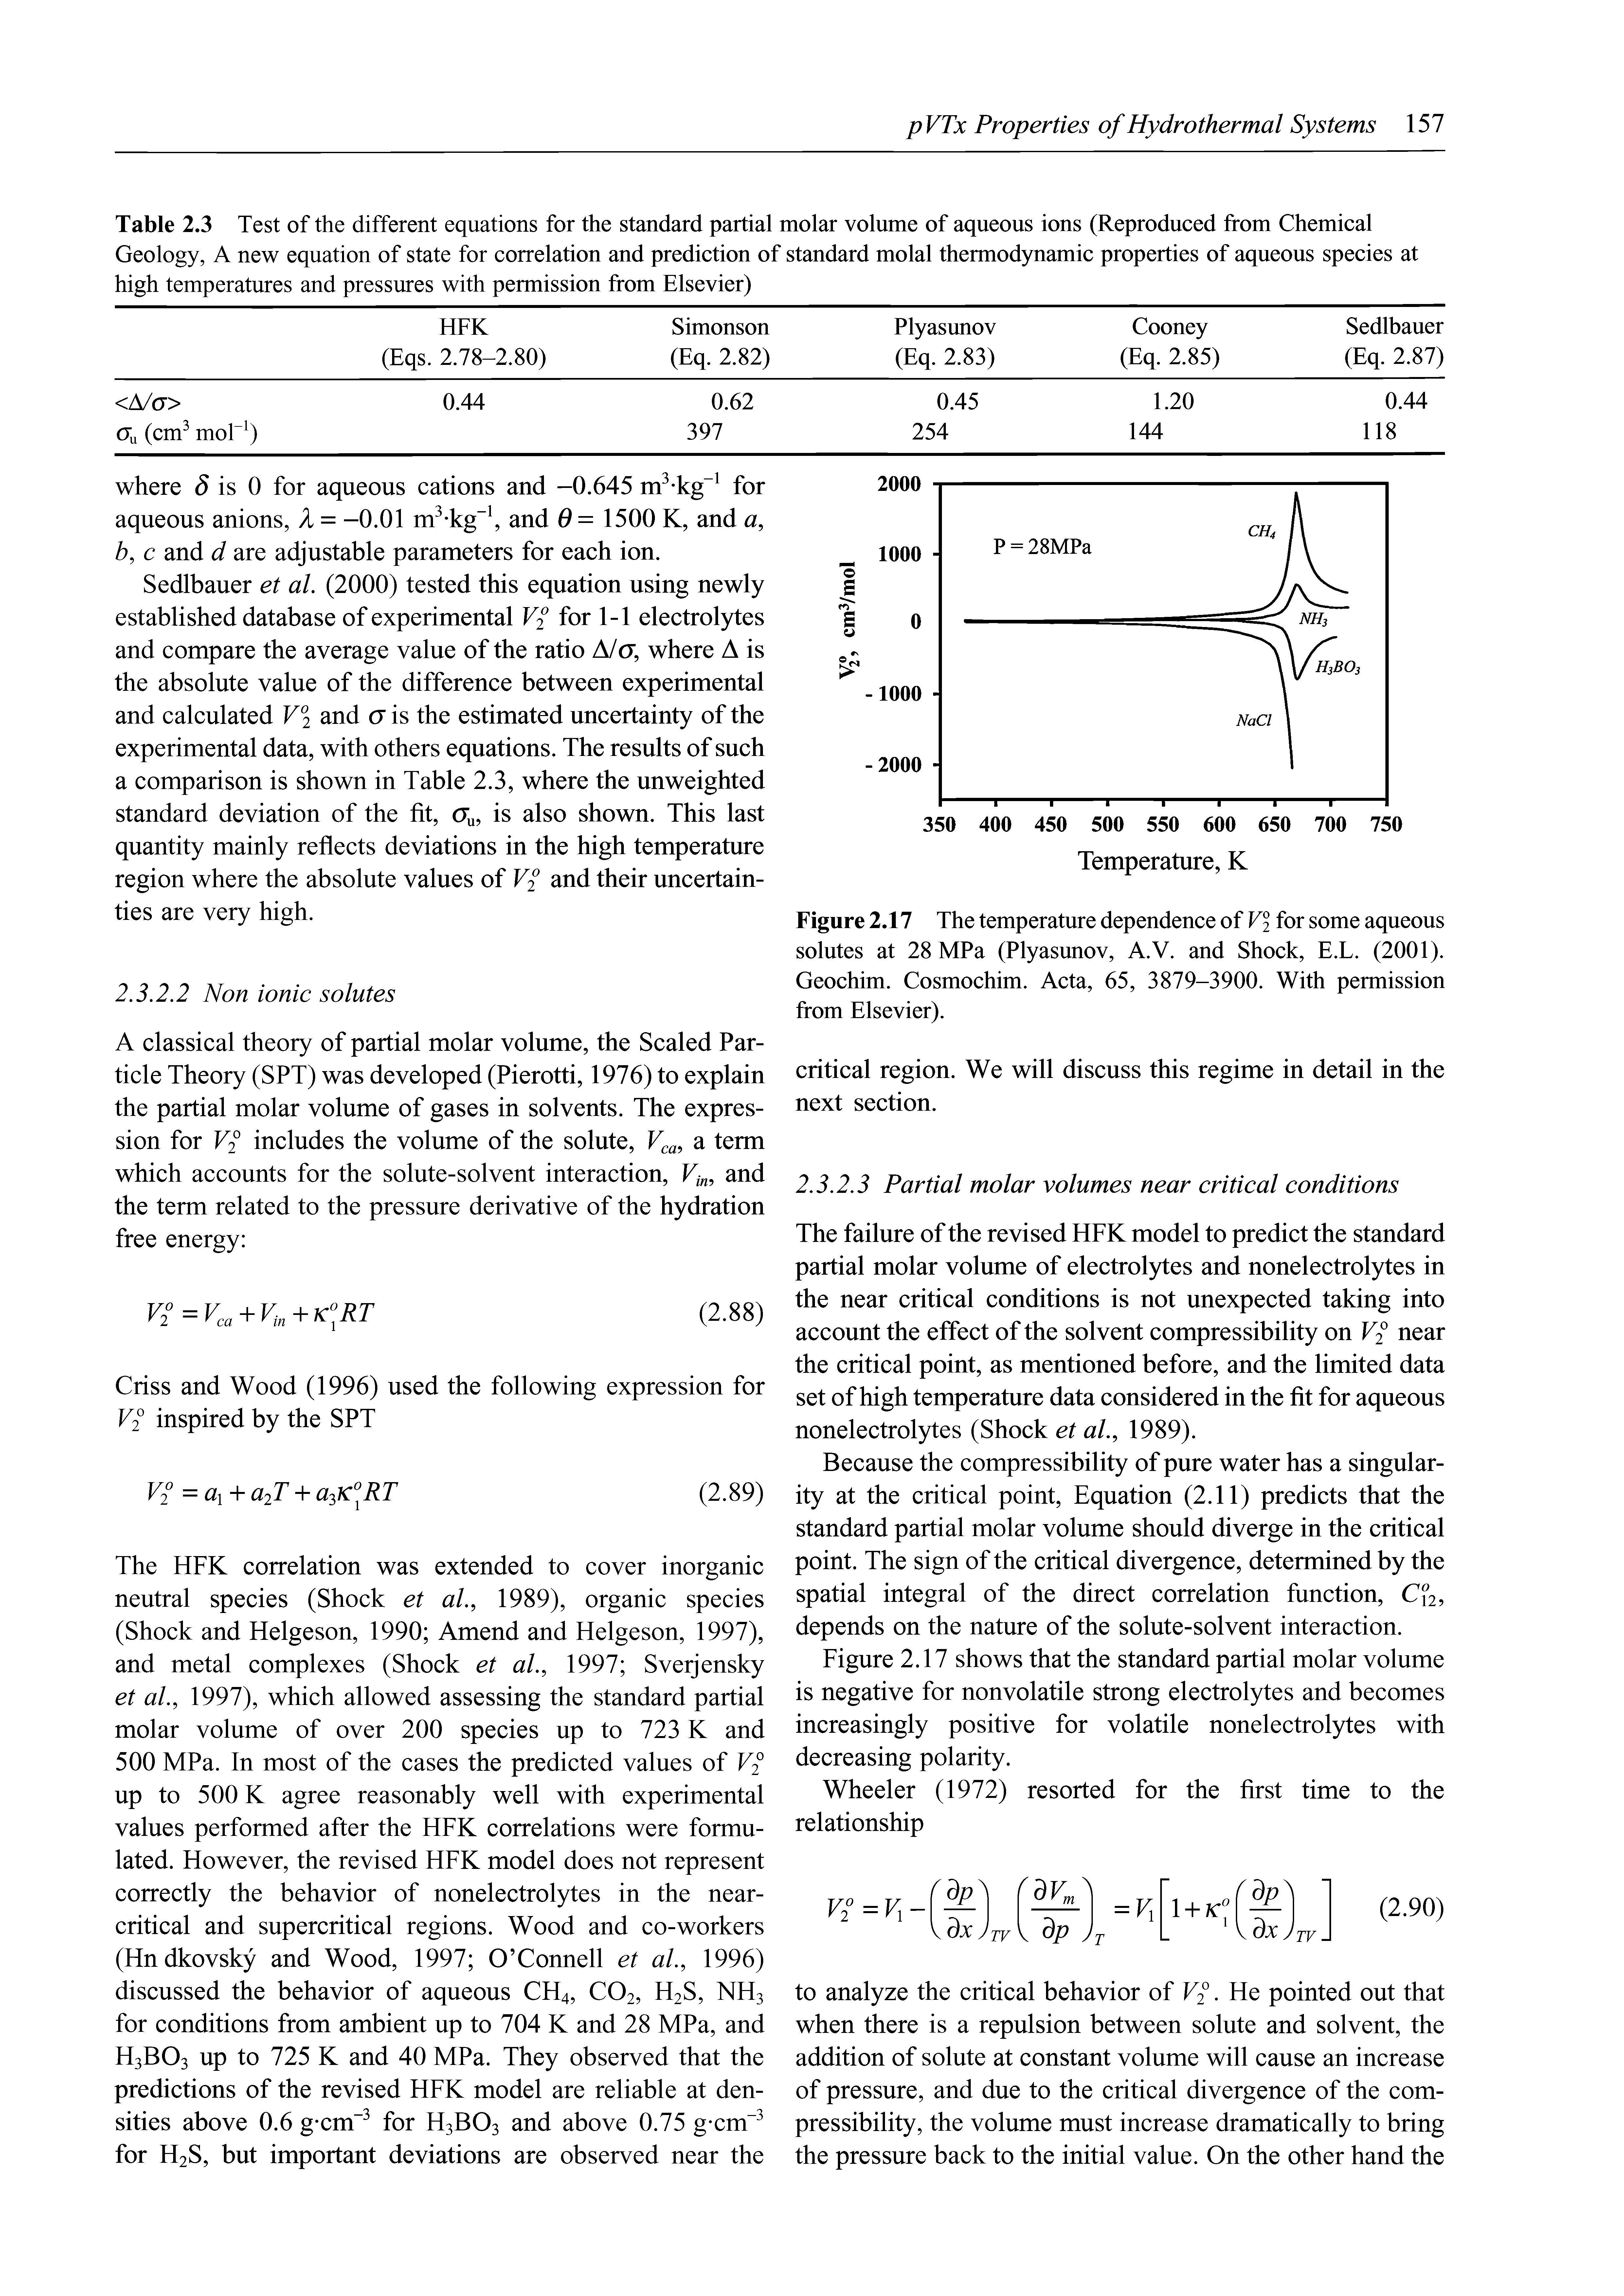 Table 2.3 Test of the different equations for the standard partial molar volume of aqueous ions (Reproduced from Chemical Geology, A new equation of state for correlation and prediction of standard molal thermodynamic properties of aqueous species at high temperatures and pressures with permission from Elsevier)...